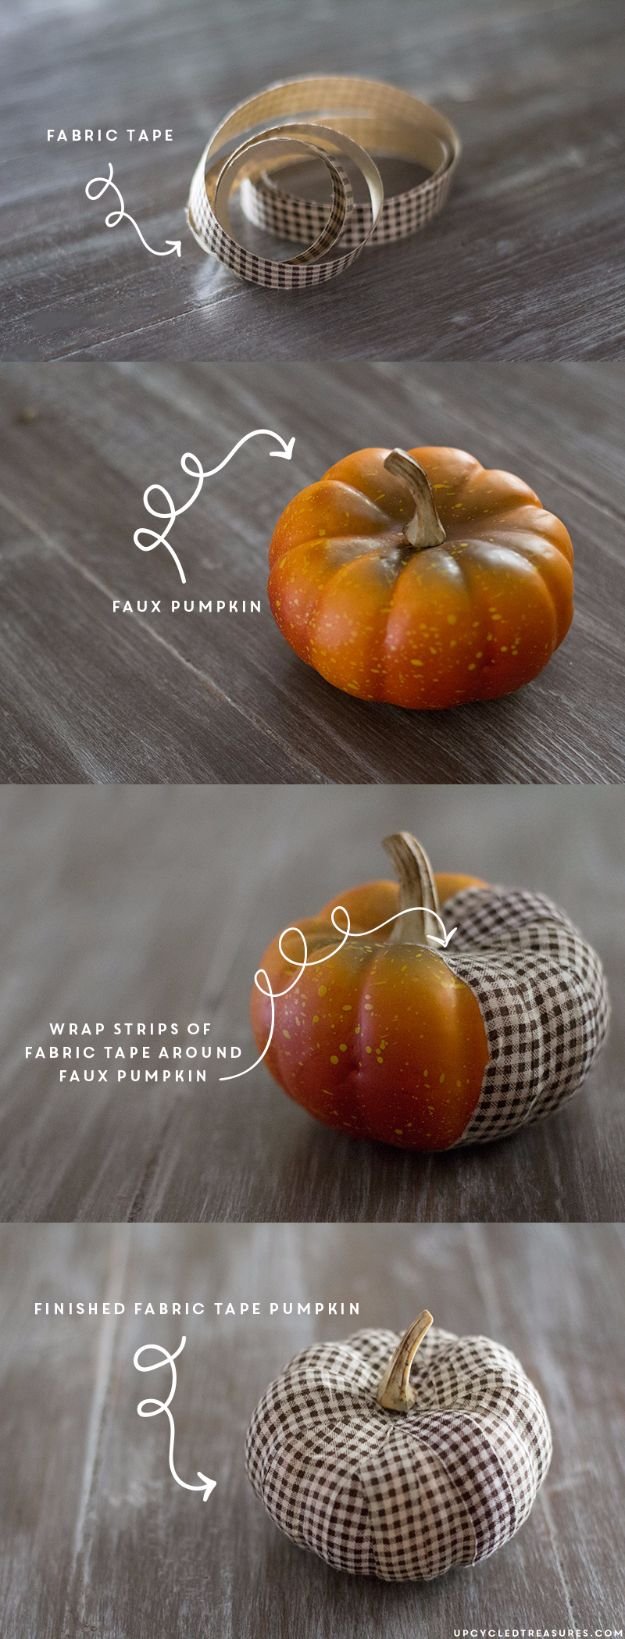 Best Crafts for Fall - DIY Fabric Tape Pumpkin - DIY Mason Jar Ideas, Dollar Store Crafts, Rustic Pumpkin Ideas, Wreaths, Candles and Wall Art, Centerpieces, Wedding Decorations, Homemade Gifts, Craft Projects with Leaves, Flowers and Burlap, Painted Art, Candles and Luminaries for Cool Home Decor - Quick and Easy Projects With Step by Step Tutorials and Instructions http://diyjoy.com/best-crafts-for-fall